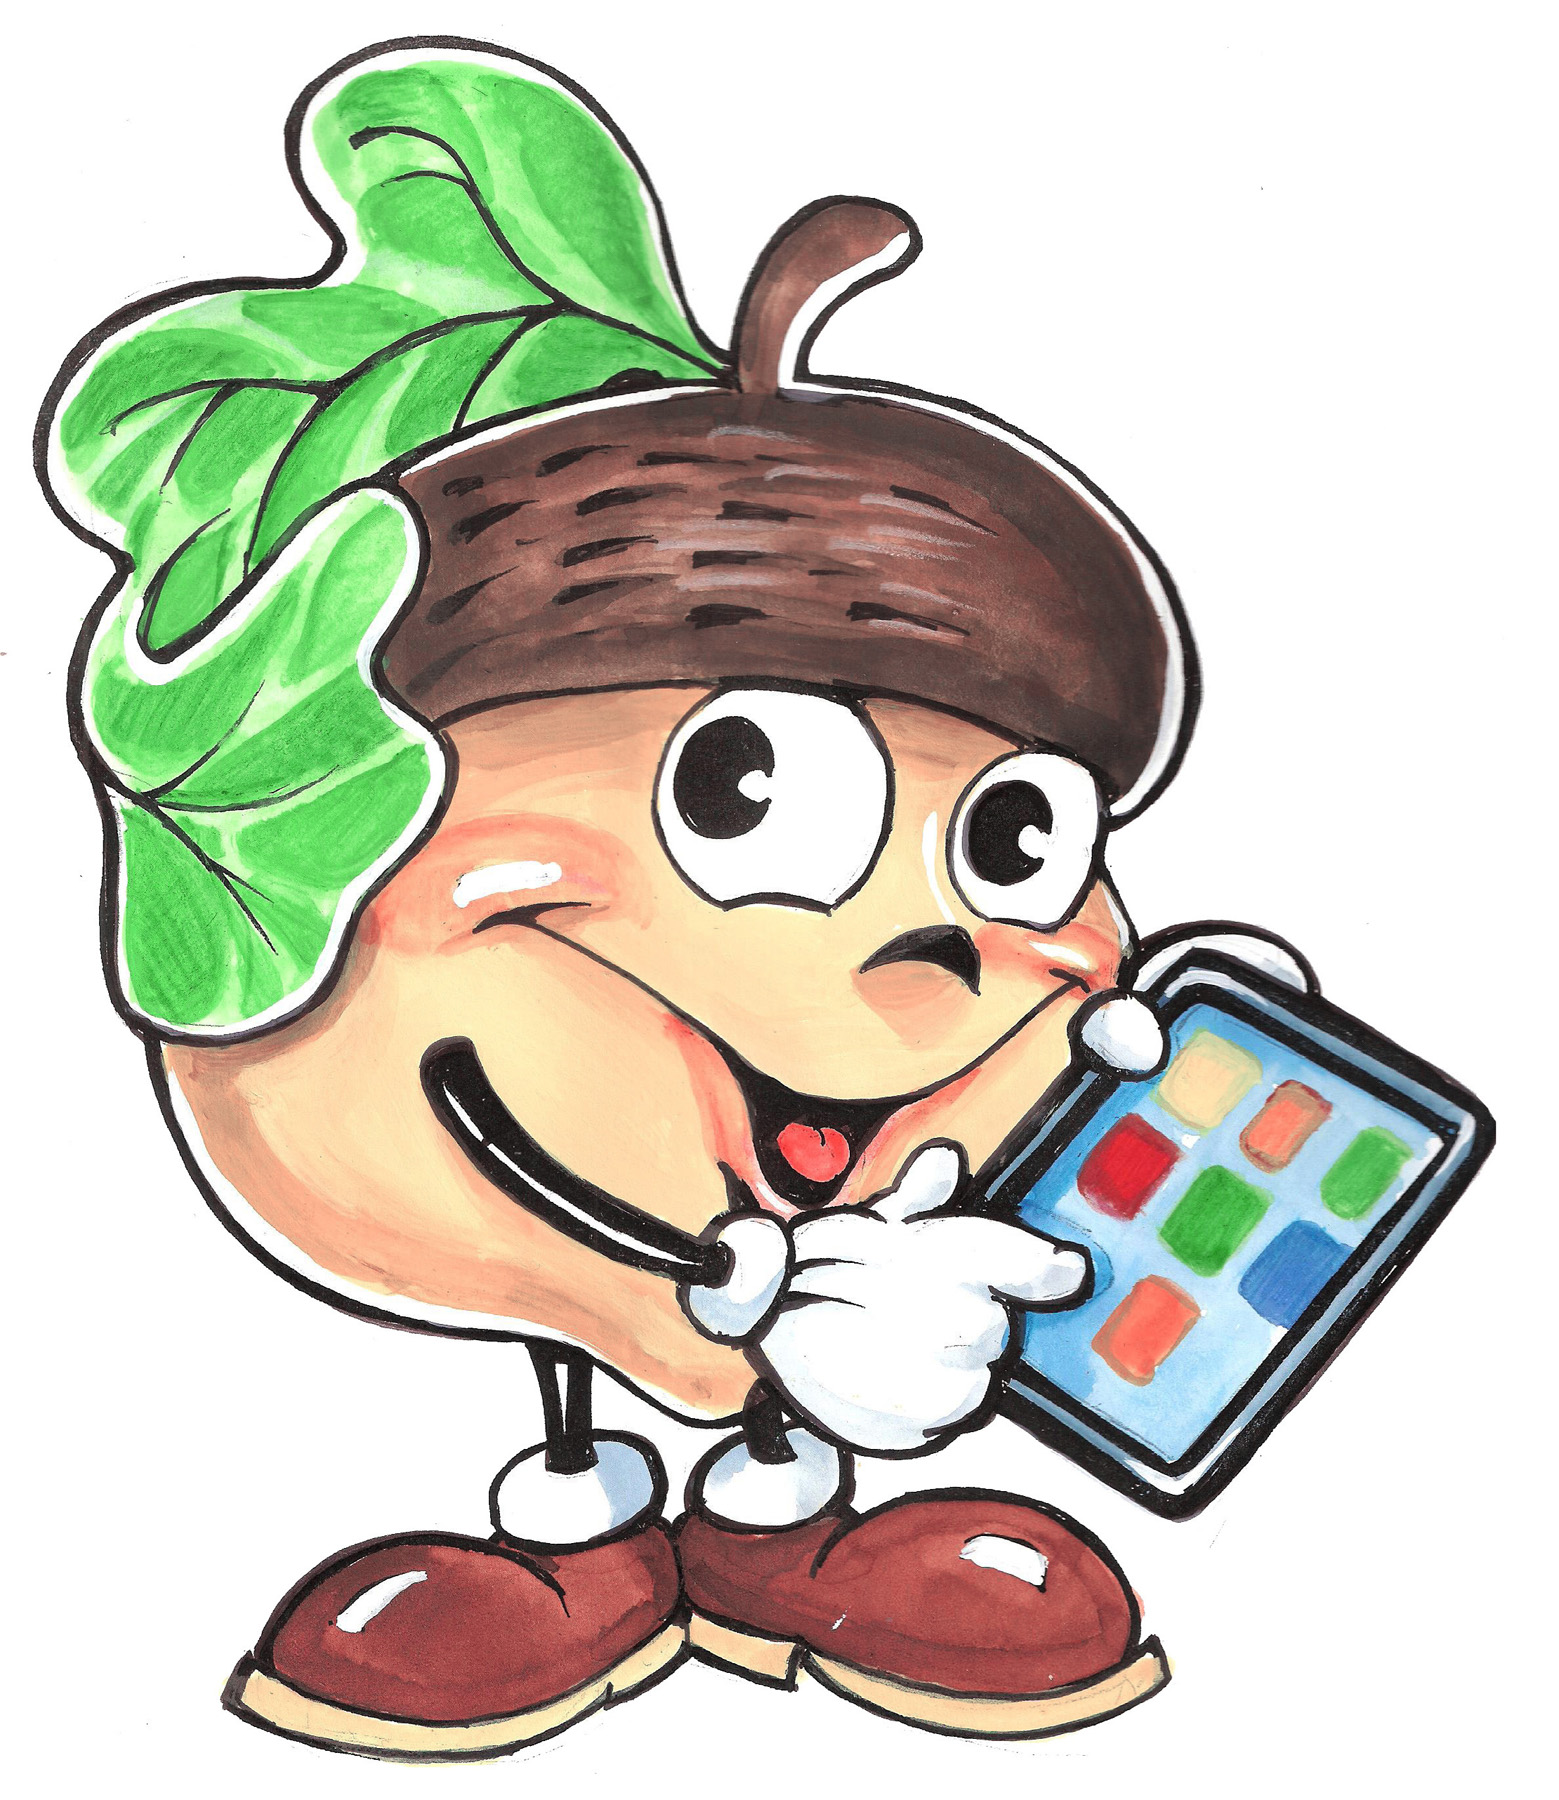 Acorn holding a tablet